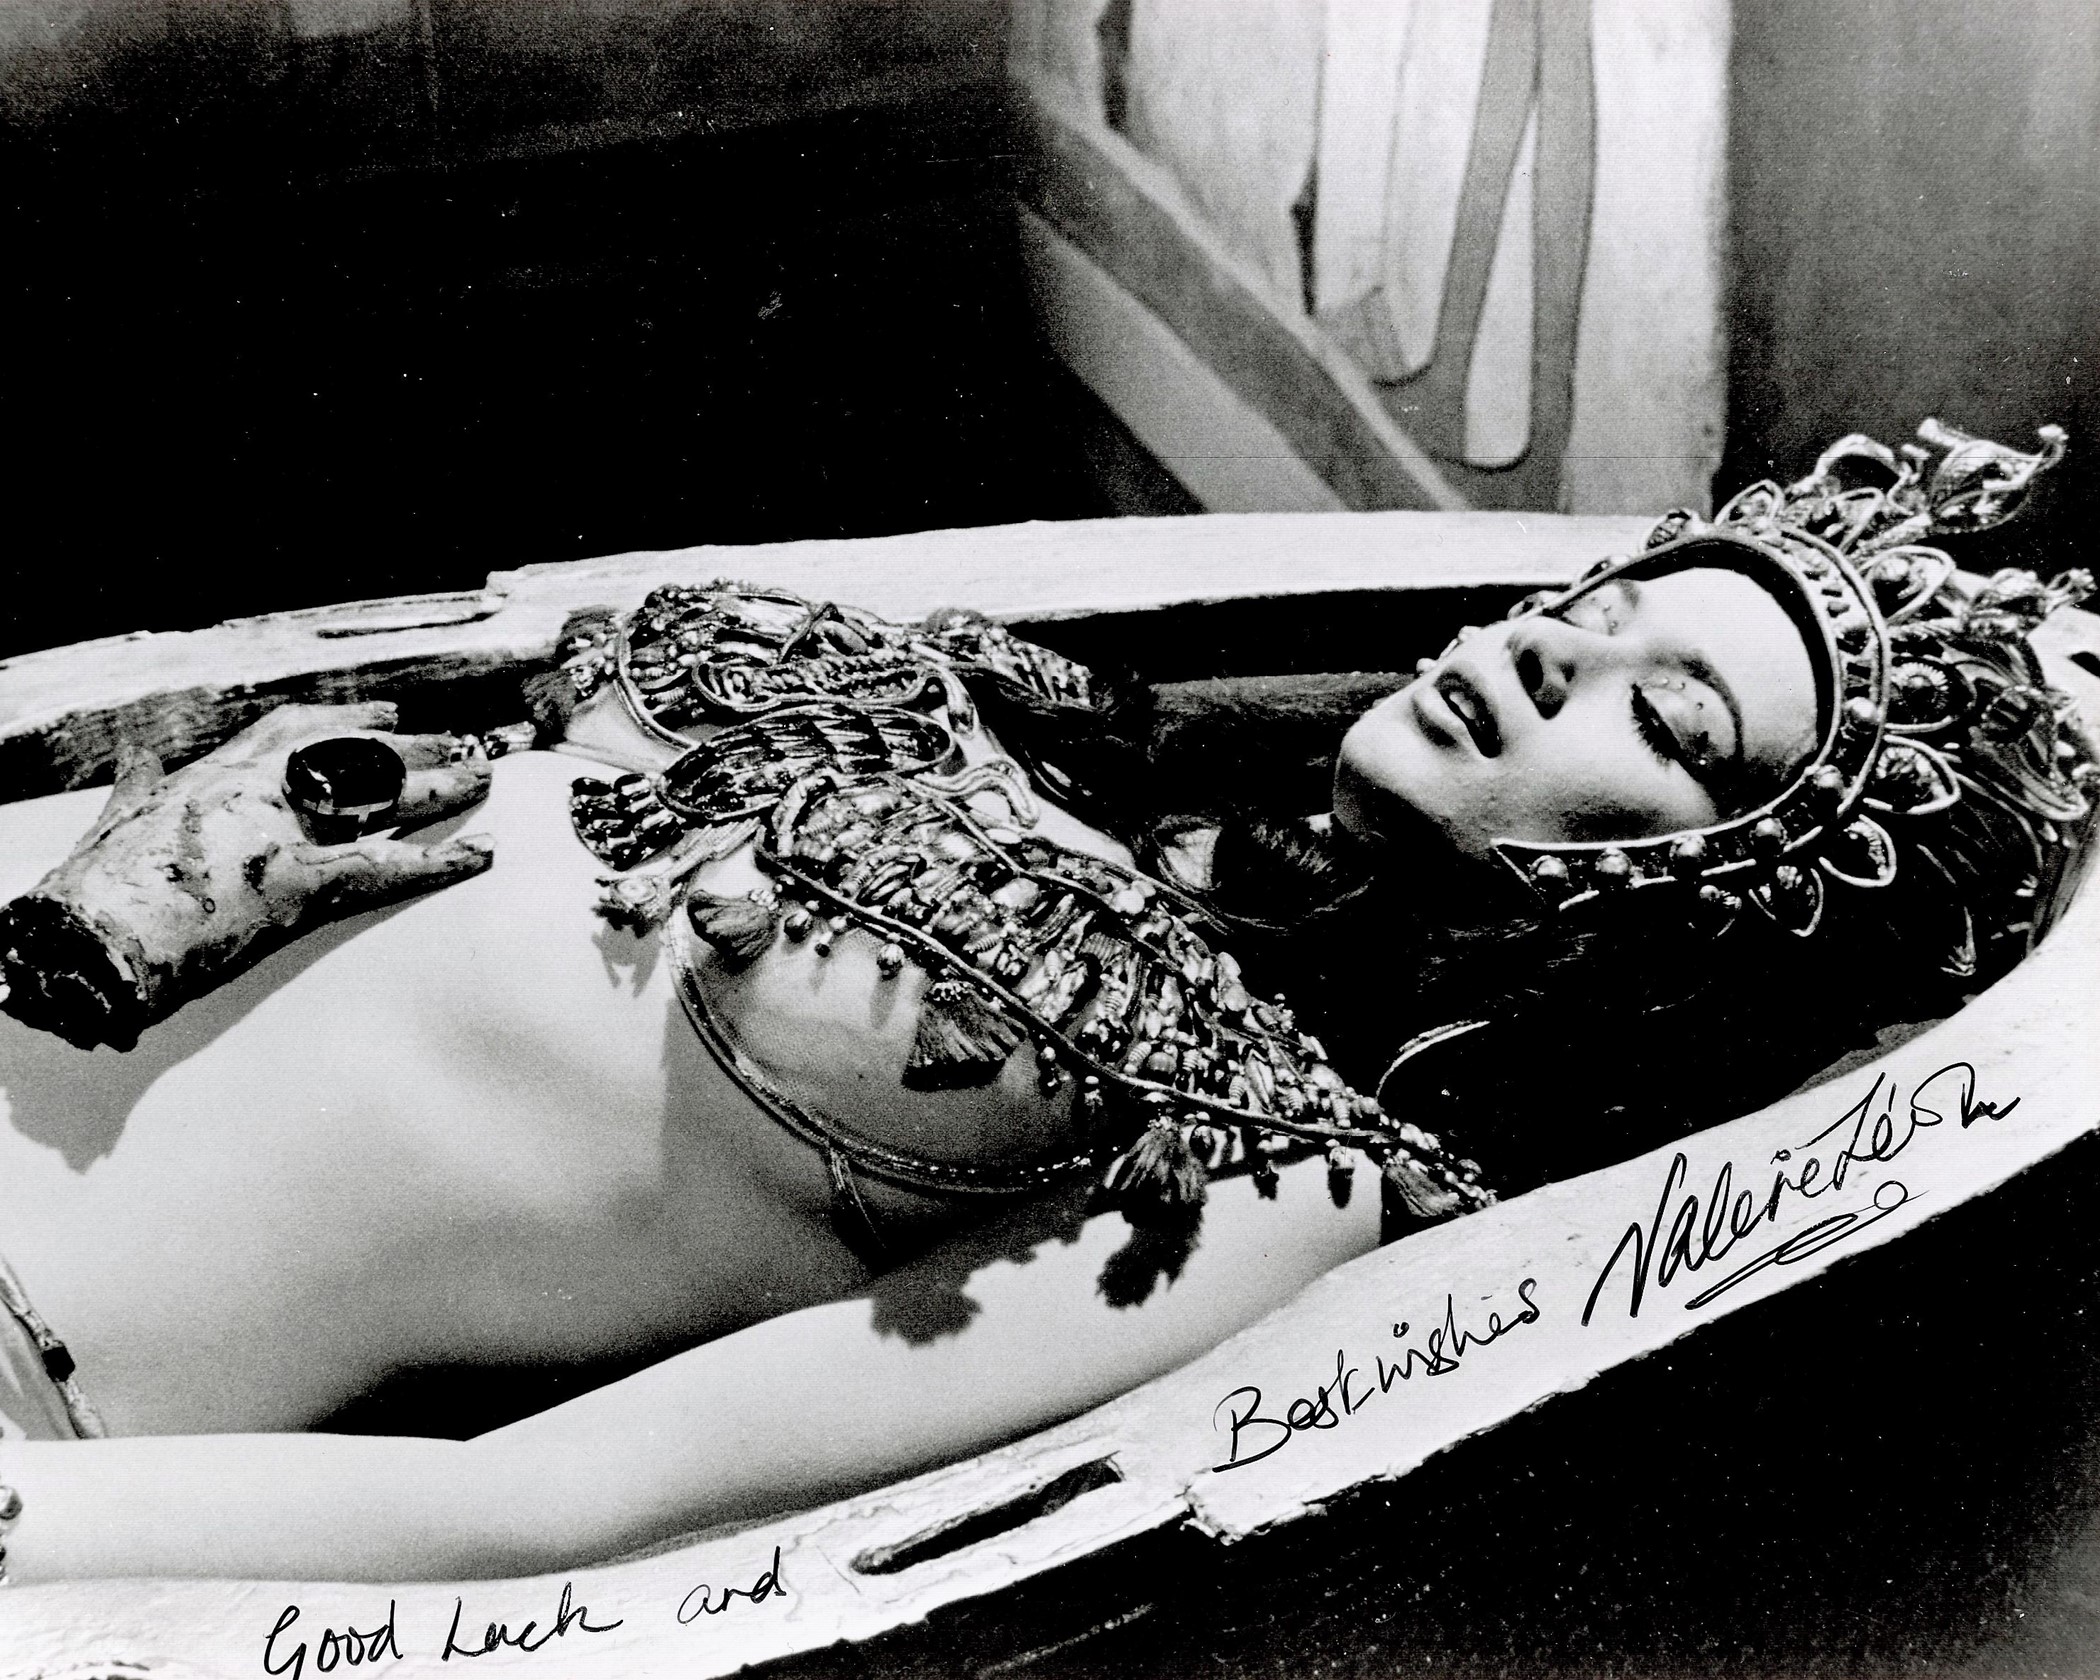 Valerie Leon signed 10x8 black and white photograph uniquely inscribed- Good luck and best wishes.